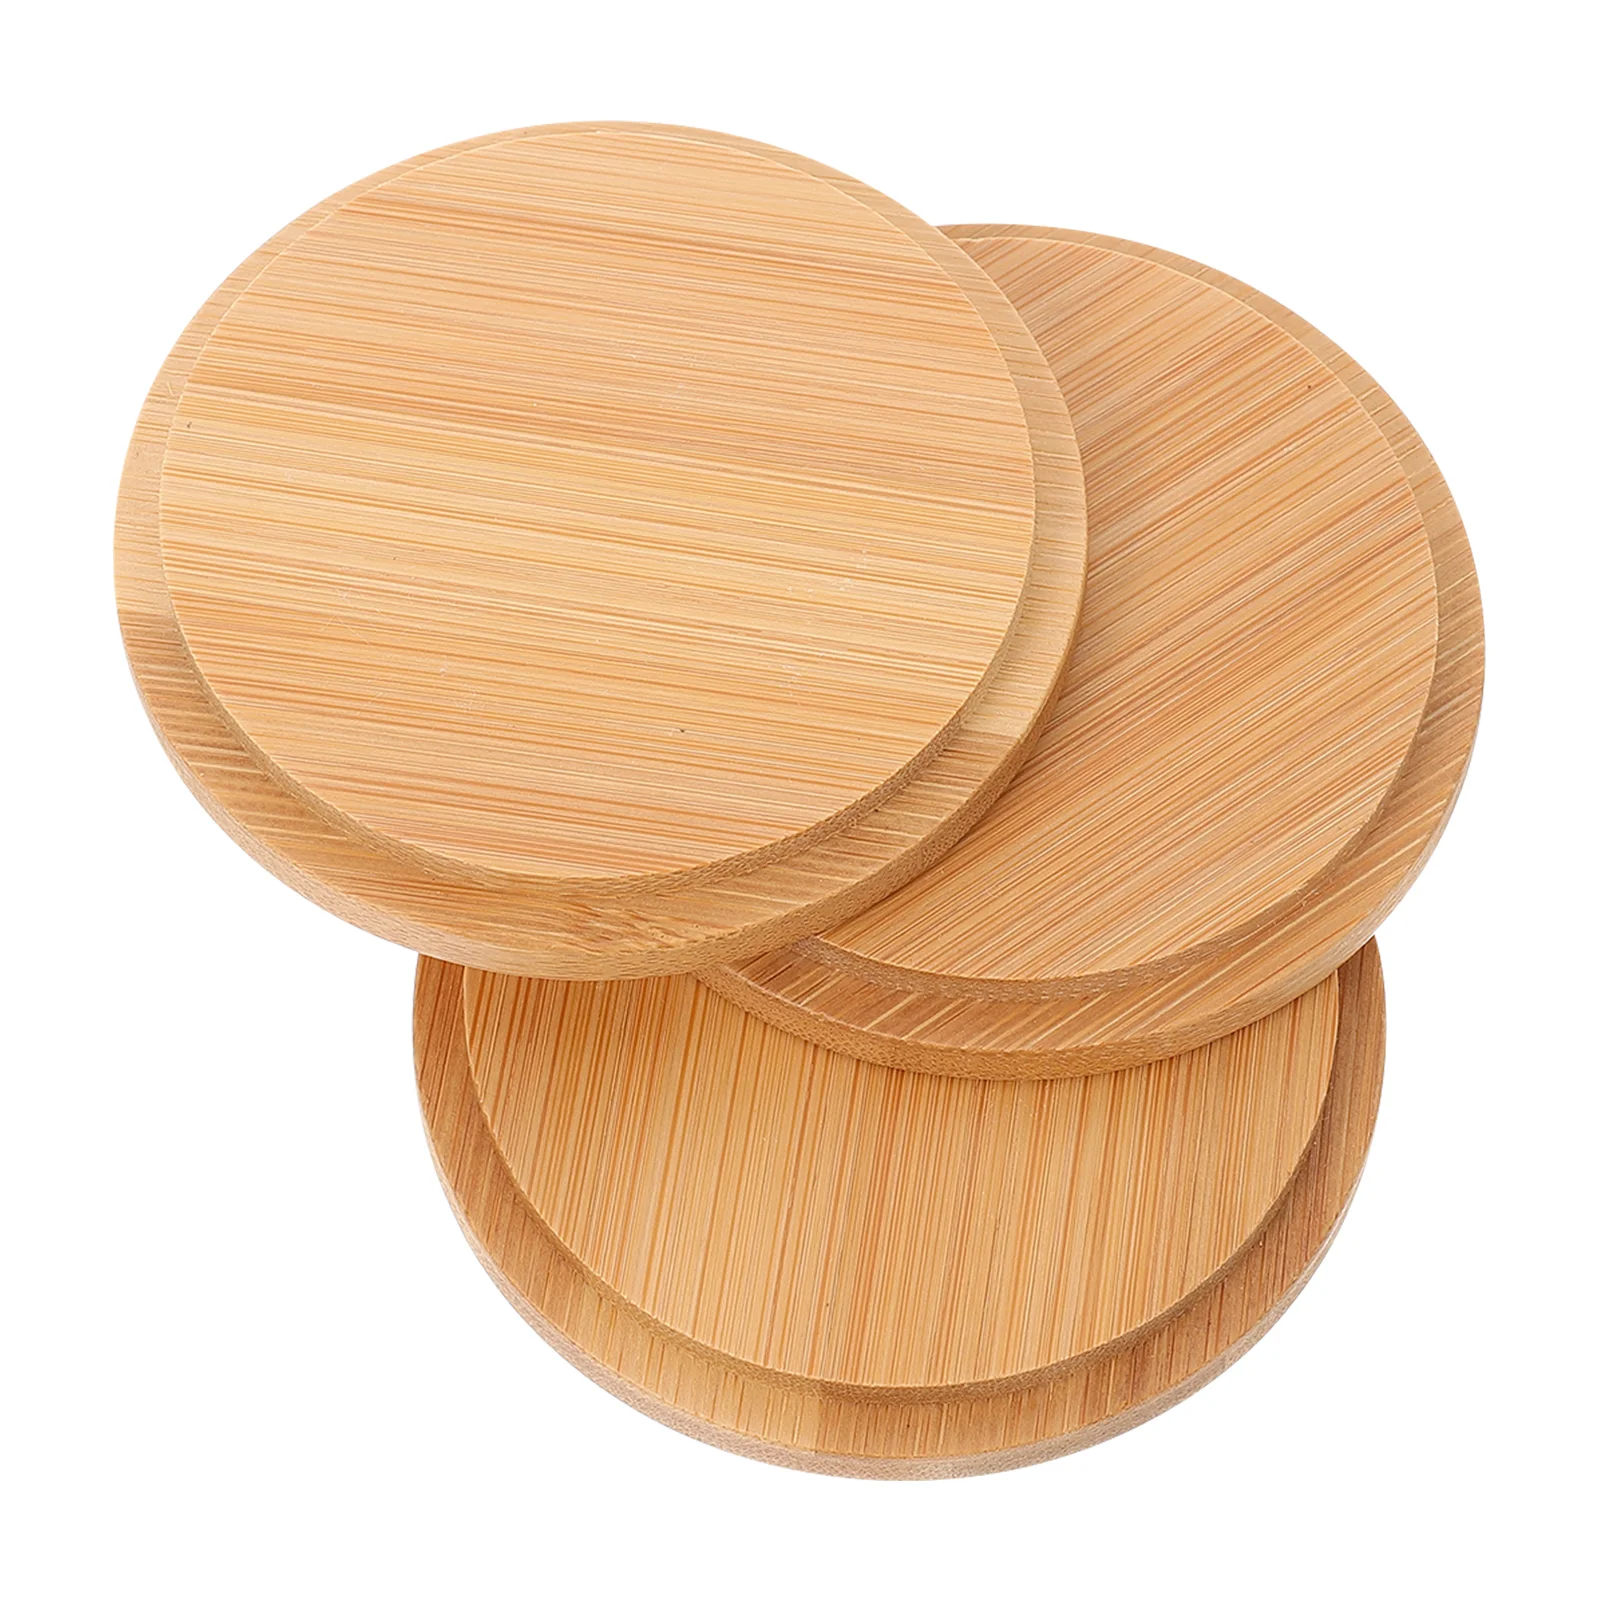 

3 Pcs Water Cup Bamboo Lid Insulation Covers Fresh-keeping Silicone Wooden Dustproof Practical Travel Lids